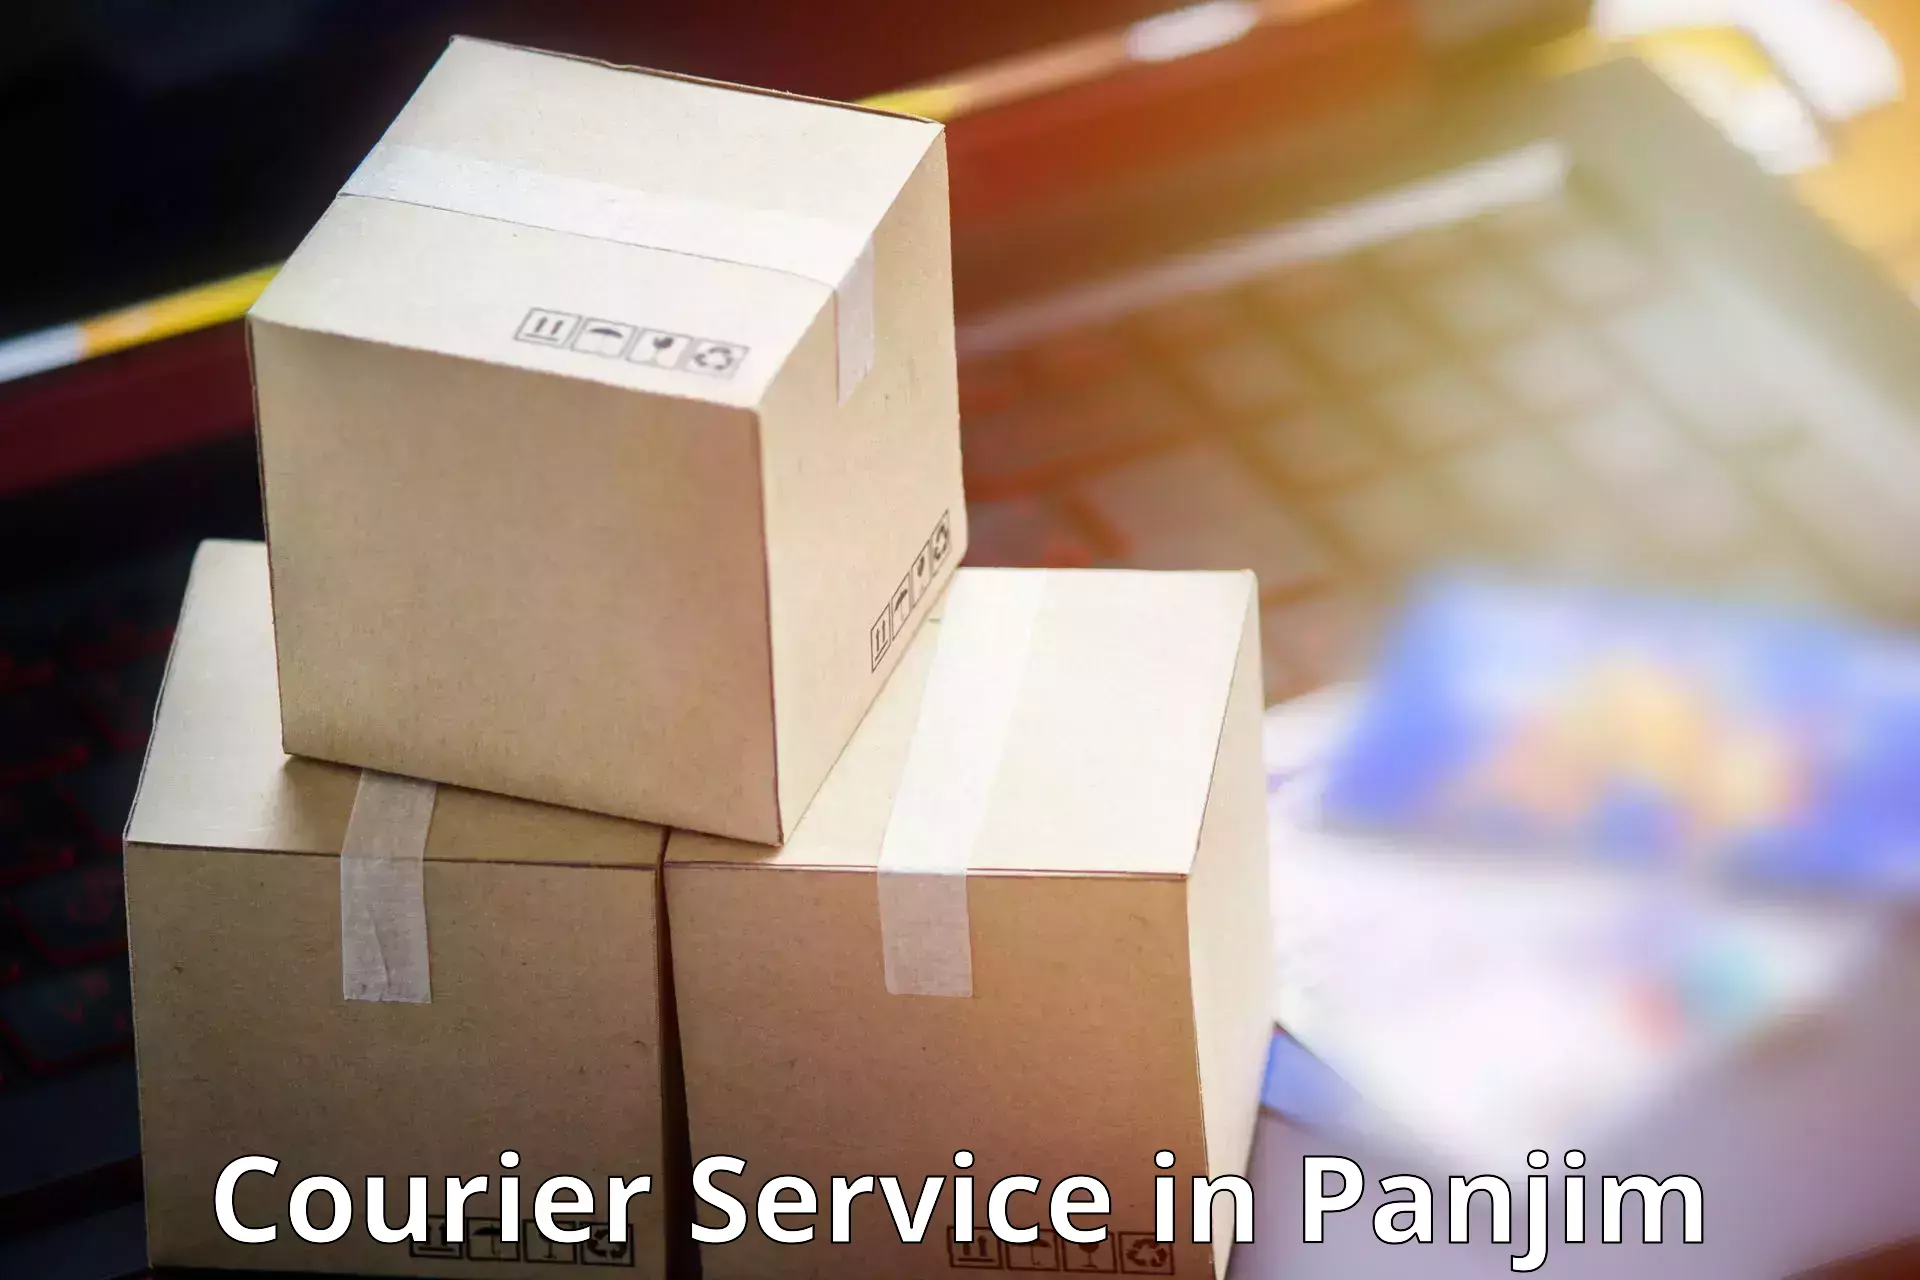 Courier service efficiency in Panjim